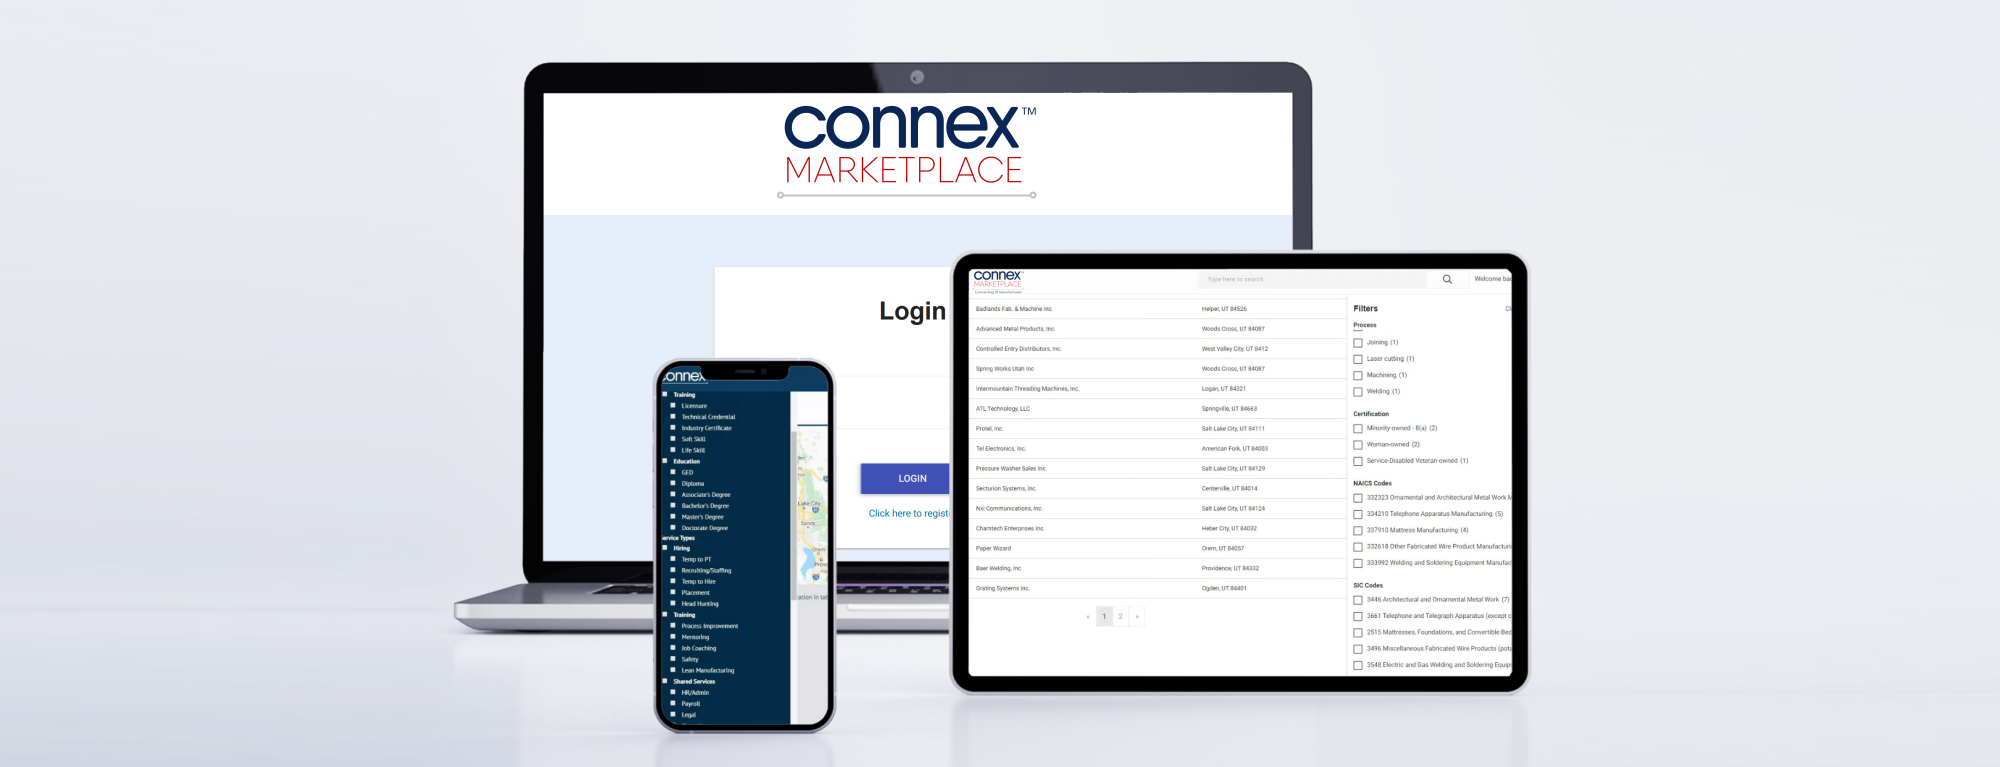 Maintaining An Accurate Supplier Database CONNEX Marketplace